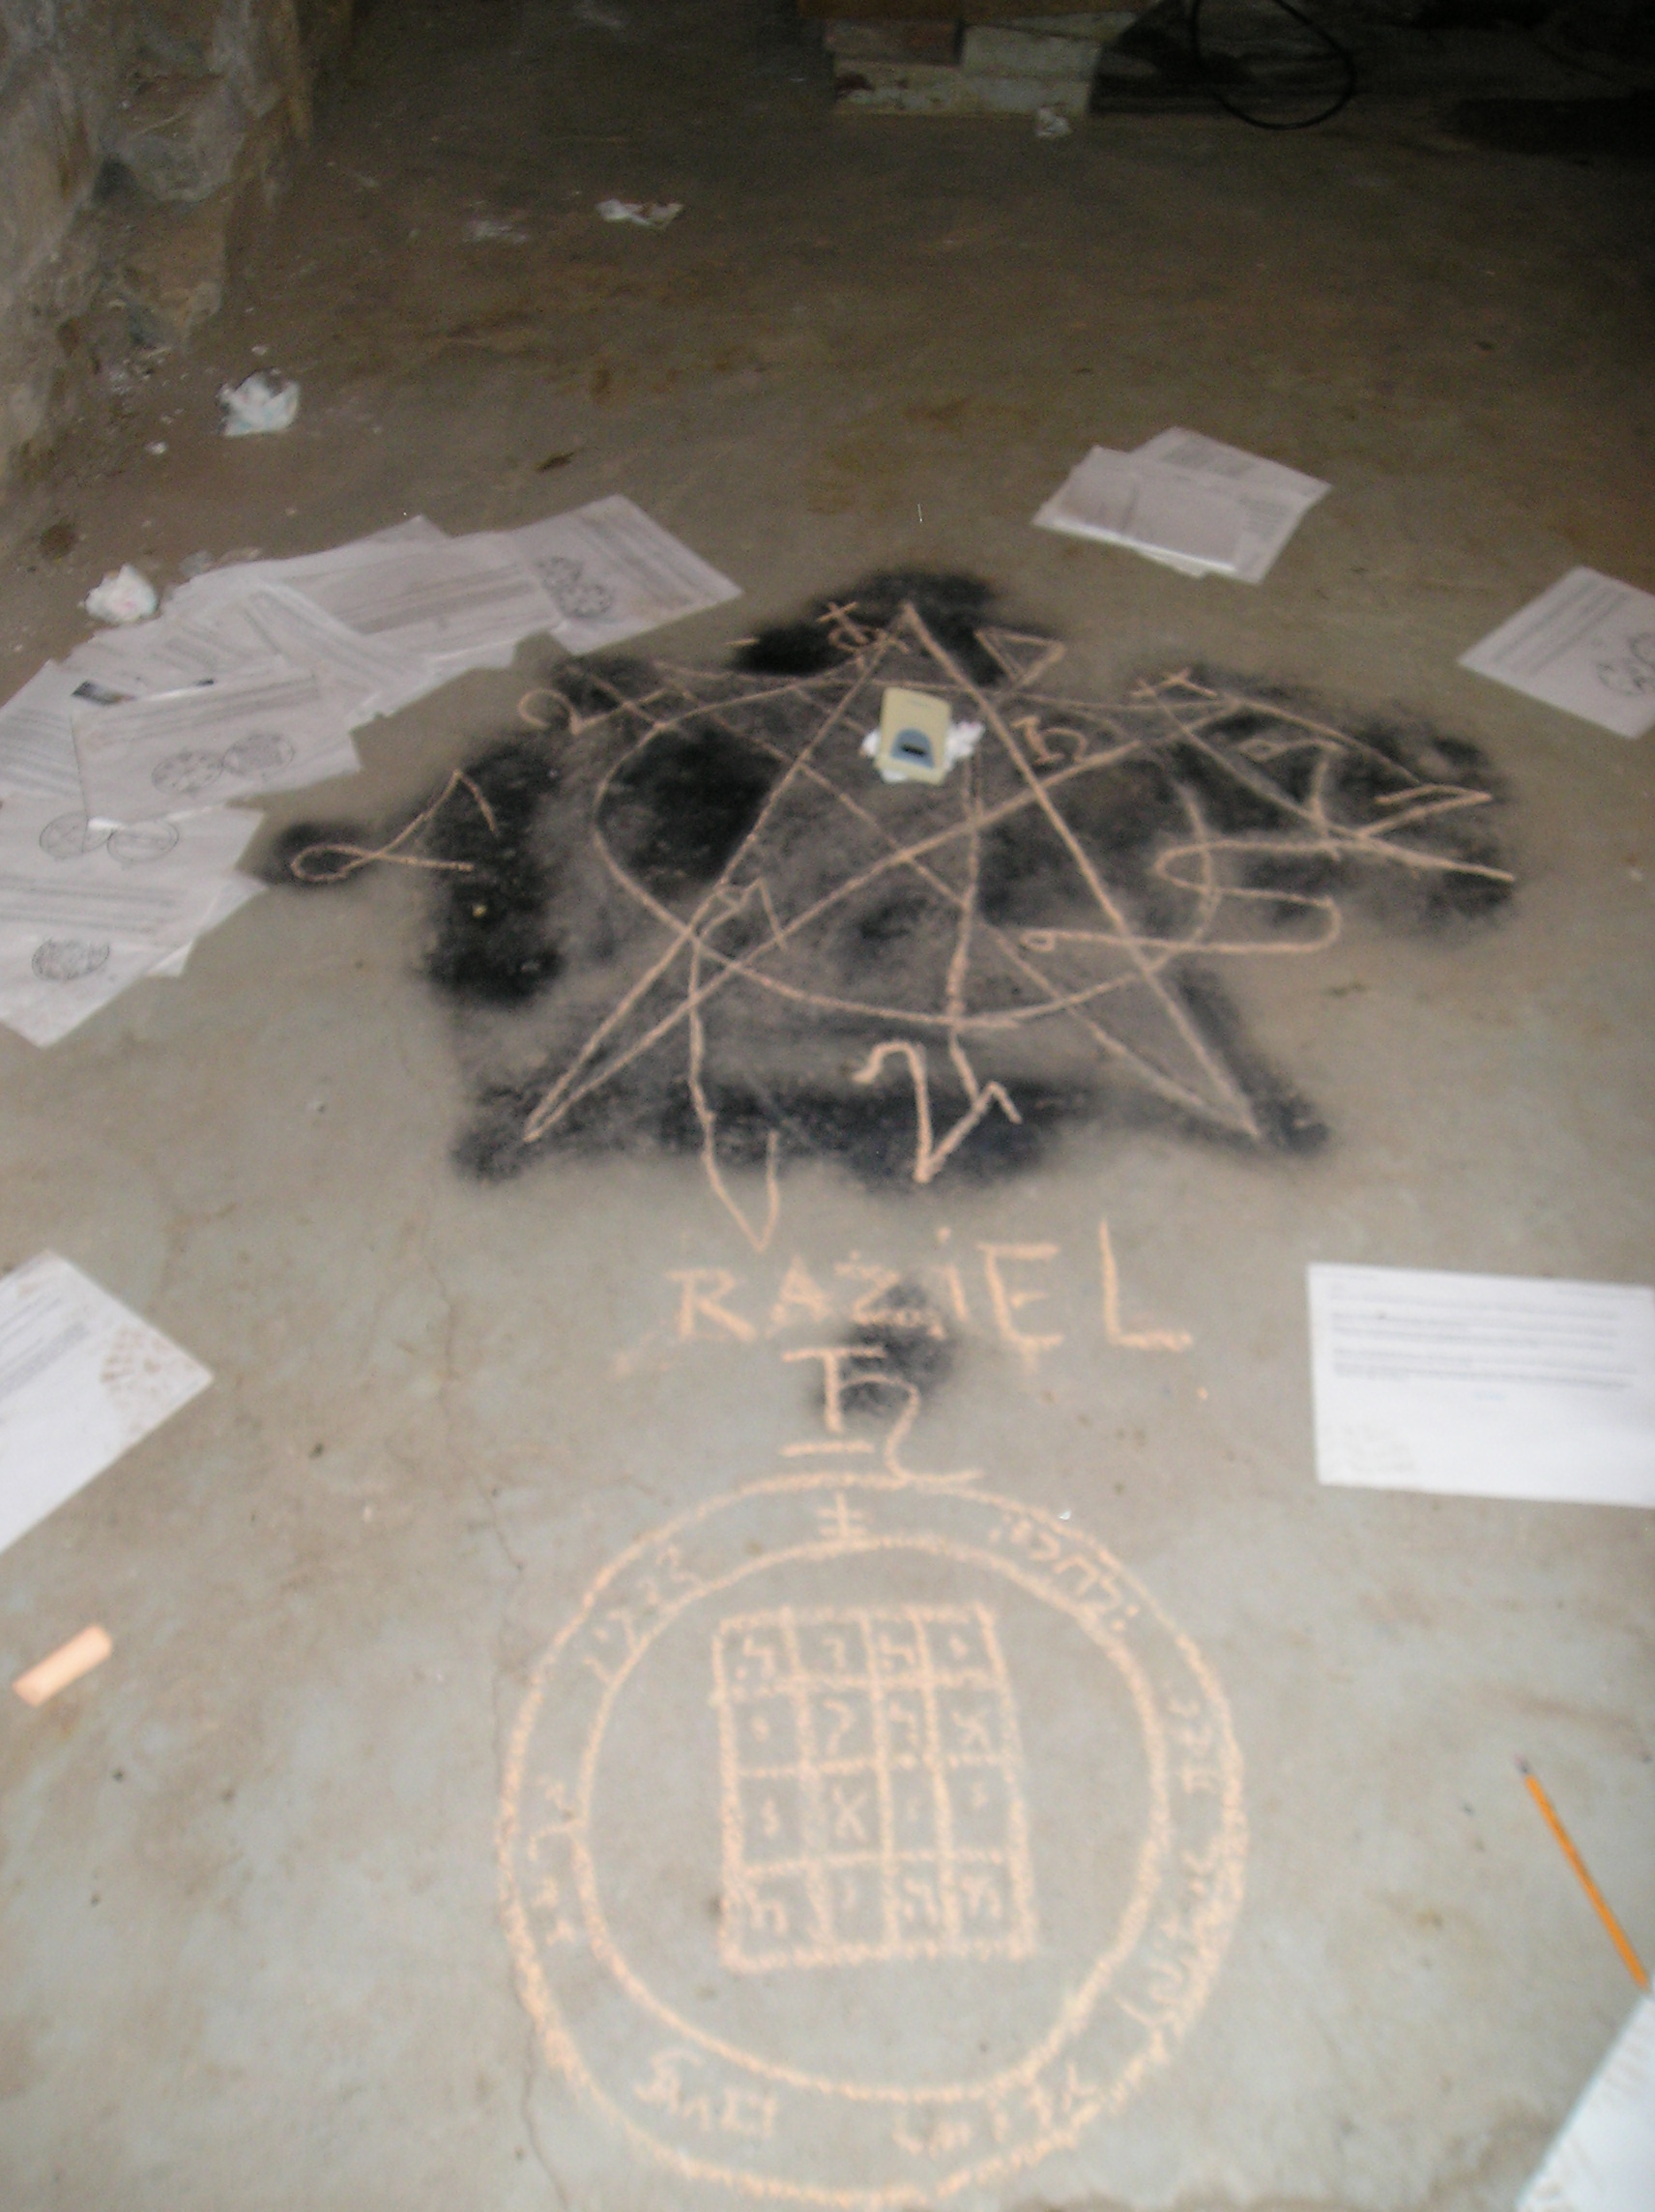  A demonologist tried to trace the outline of the pentagram left on the floor of the basement by a former tenant in an effort to determine what spells were employed.  Protective sigils were then added. 